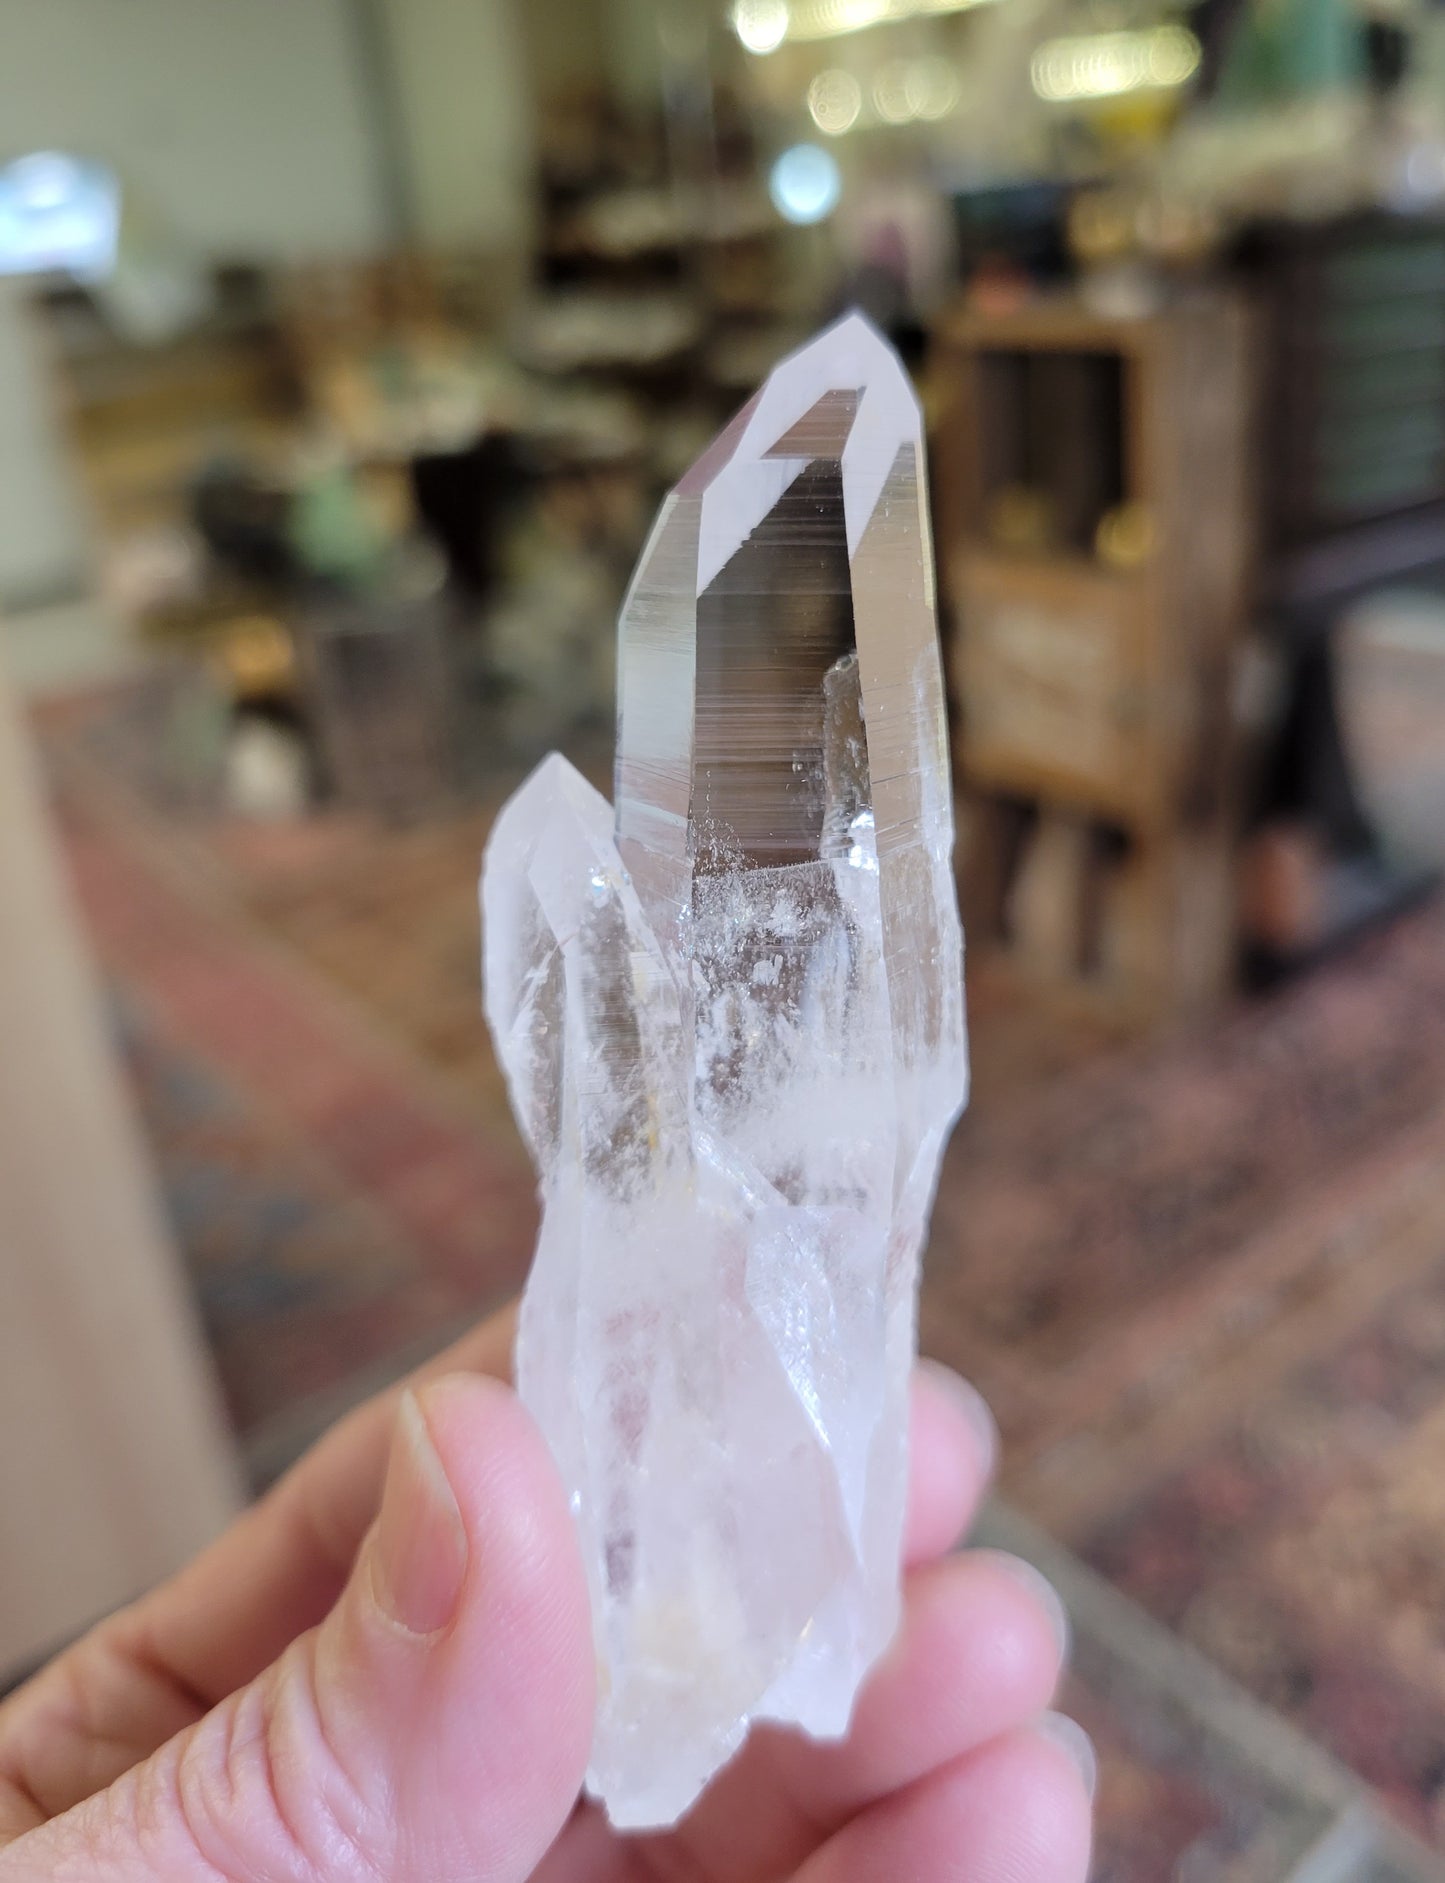 Quartz from Colombia